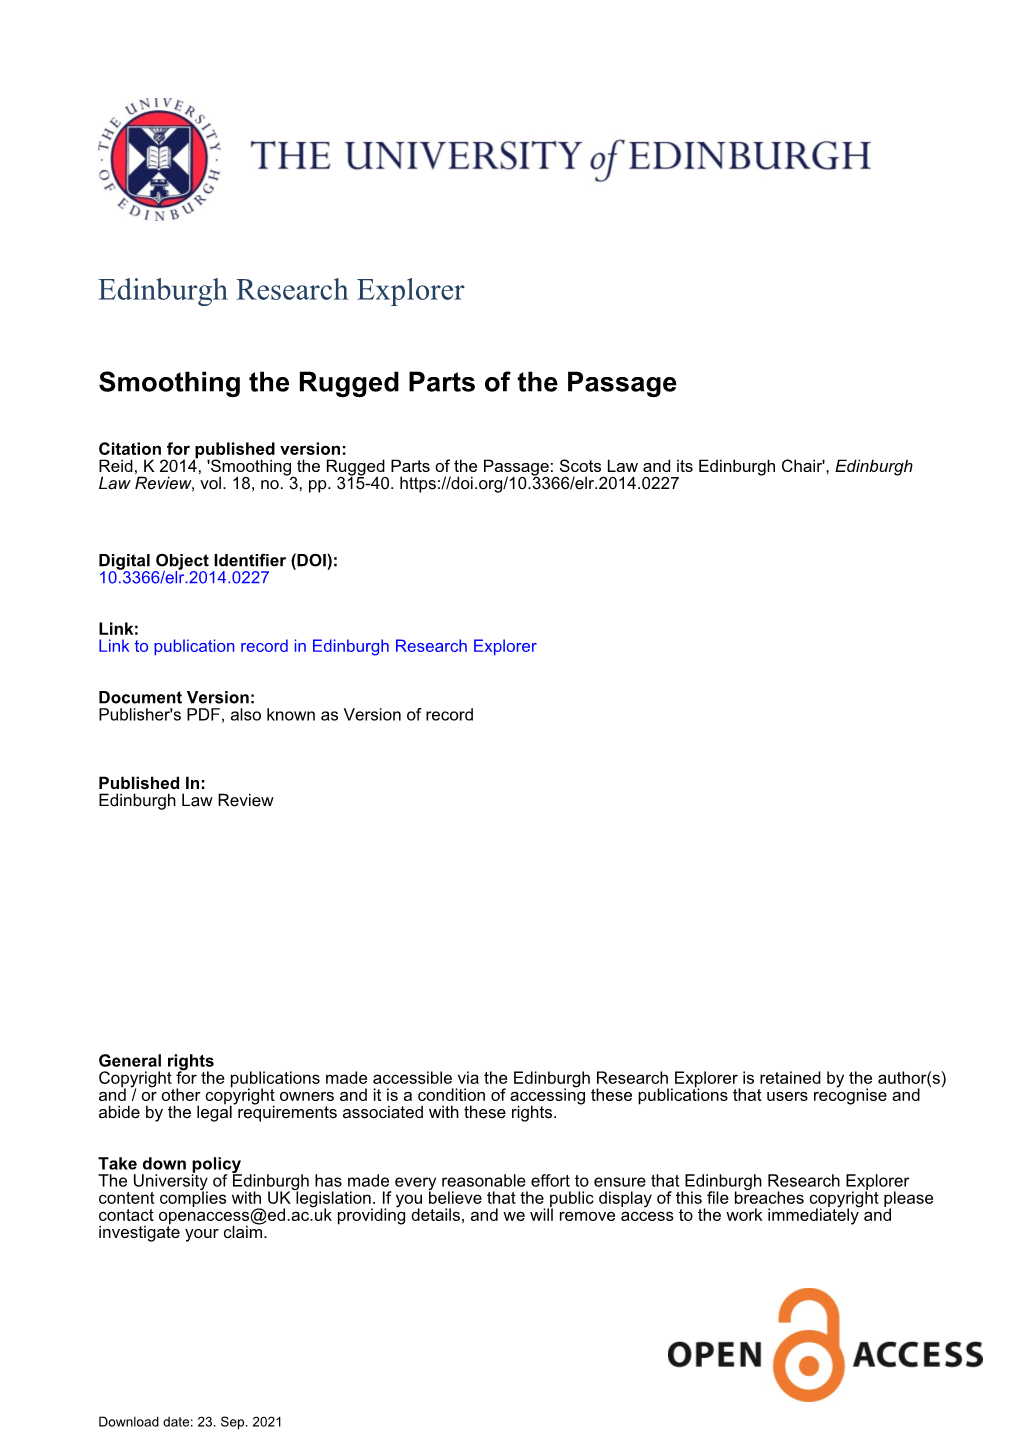 Smoothing the Rugged Parts of the Passage: Scots Law and Its Edinburgh Chair', Edinburgh Law Review, Vol